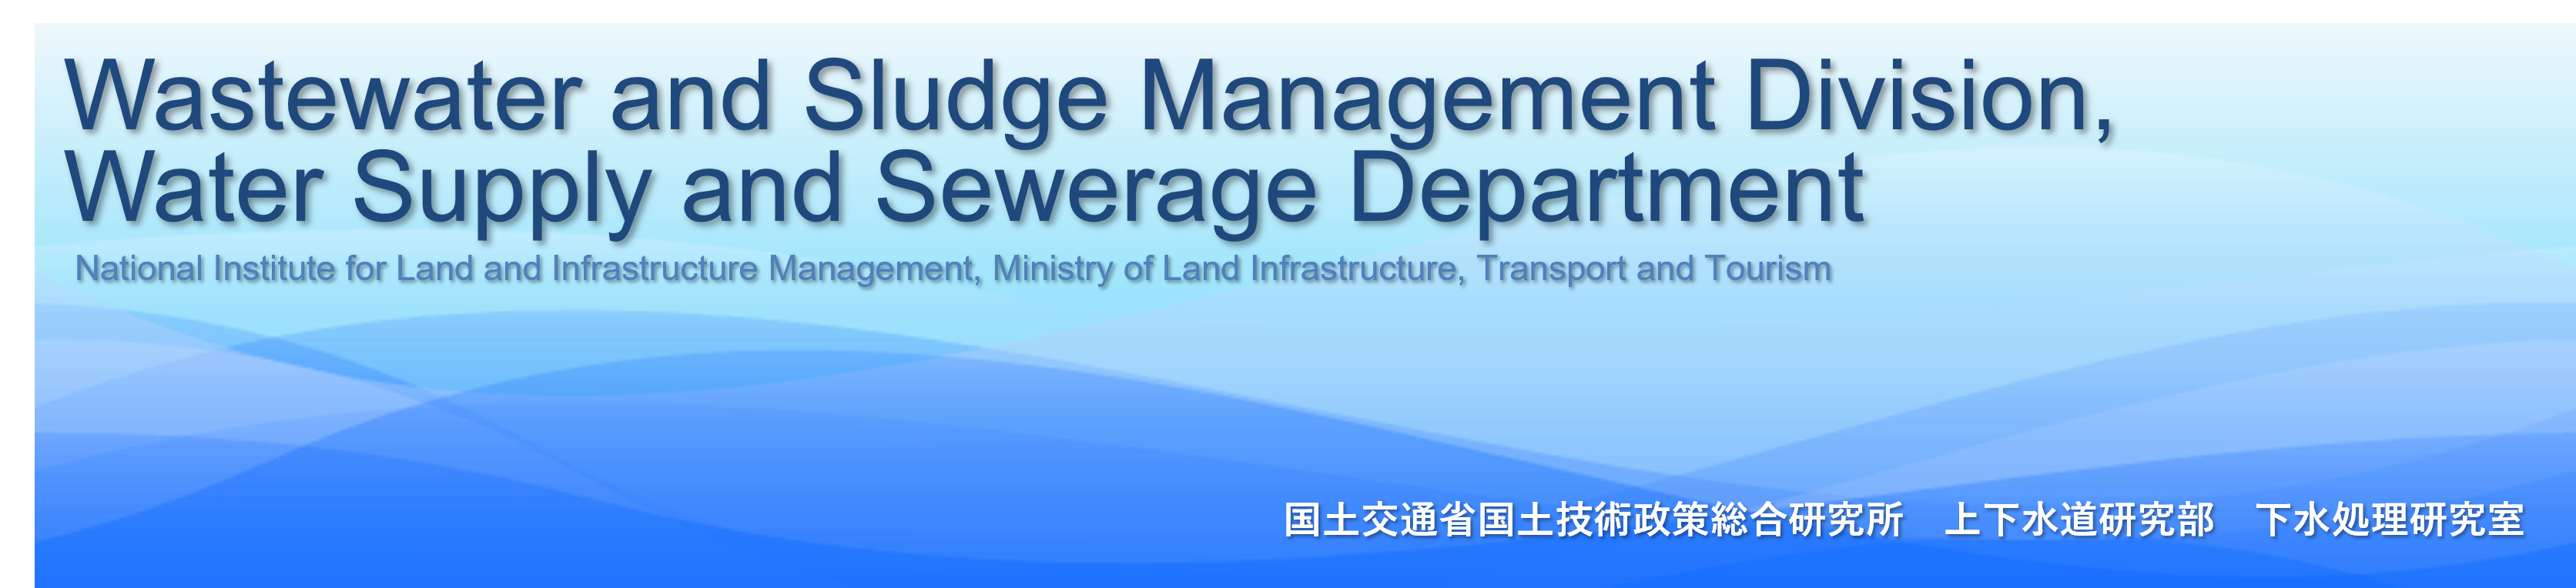 Wastewater and Sludge Management Division, Water Quality Control Department, National Institute for Land and Infrastructure Management, Ministry of Land, Infrastructure, Transport and Tourism